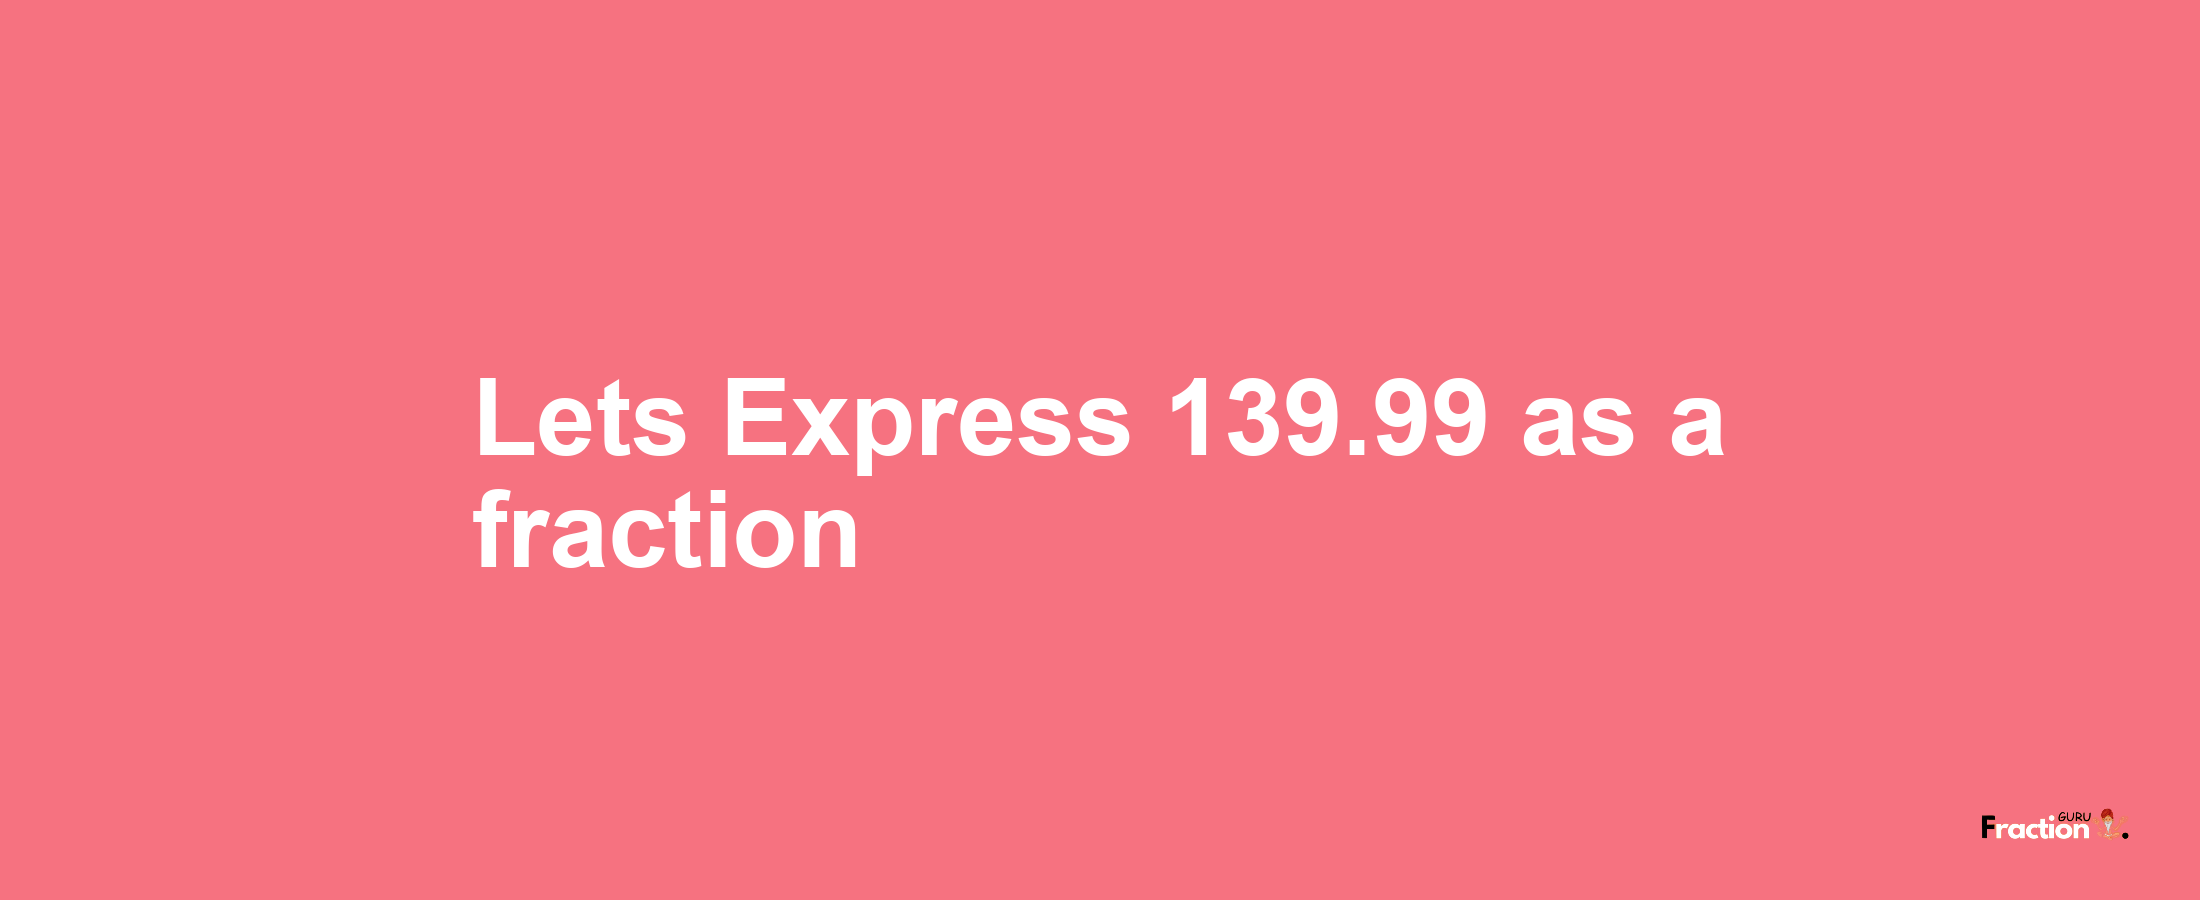 Lets Express 139.99 as afraction